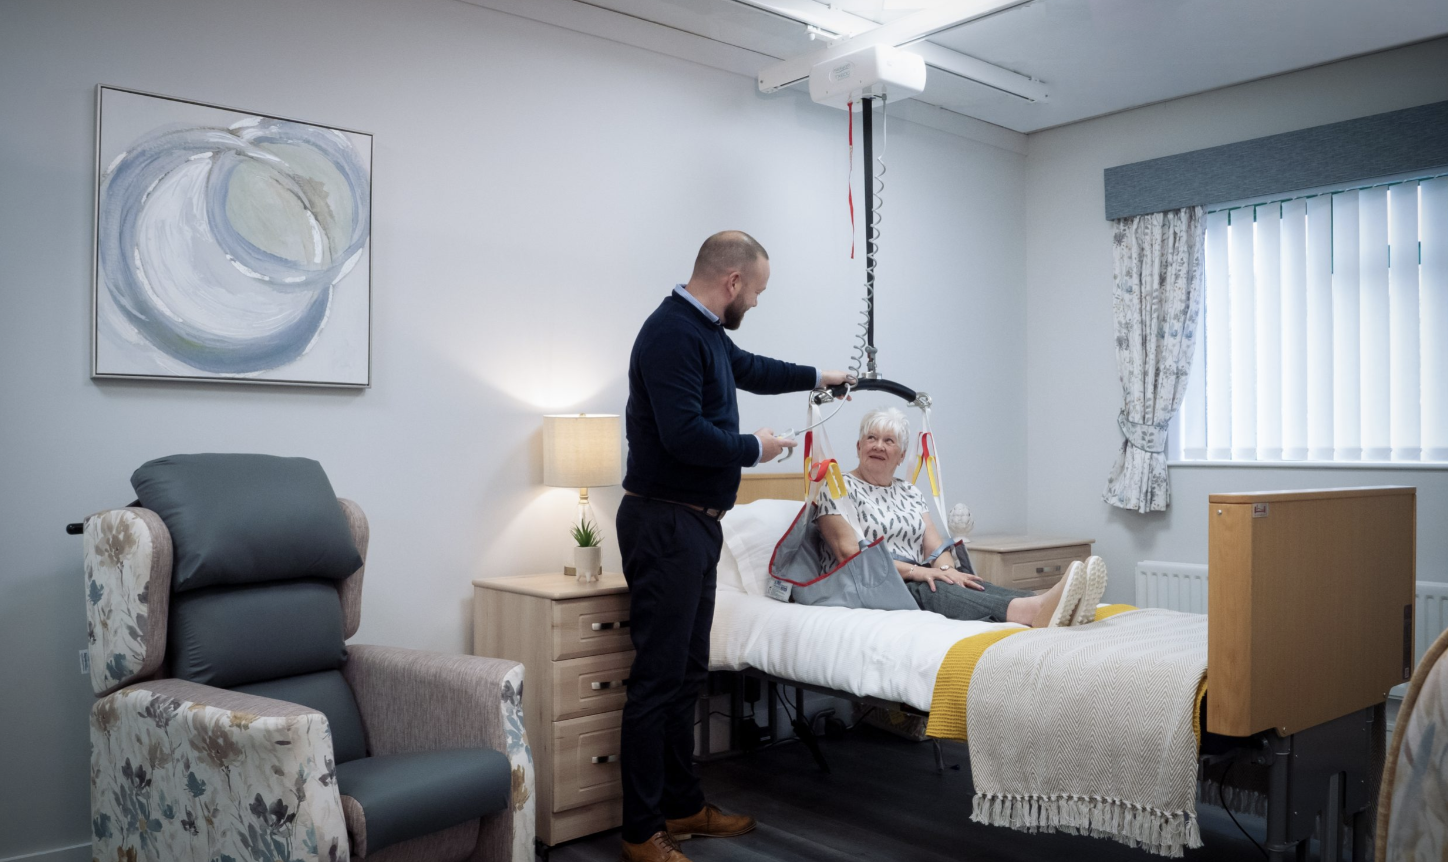 Ceiling lifts can help with caring for your loved ones